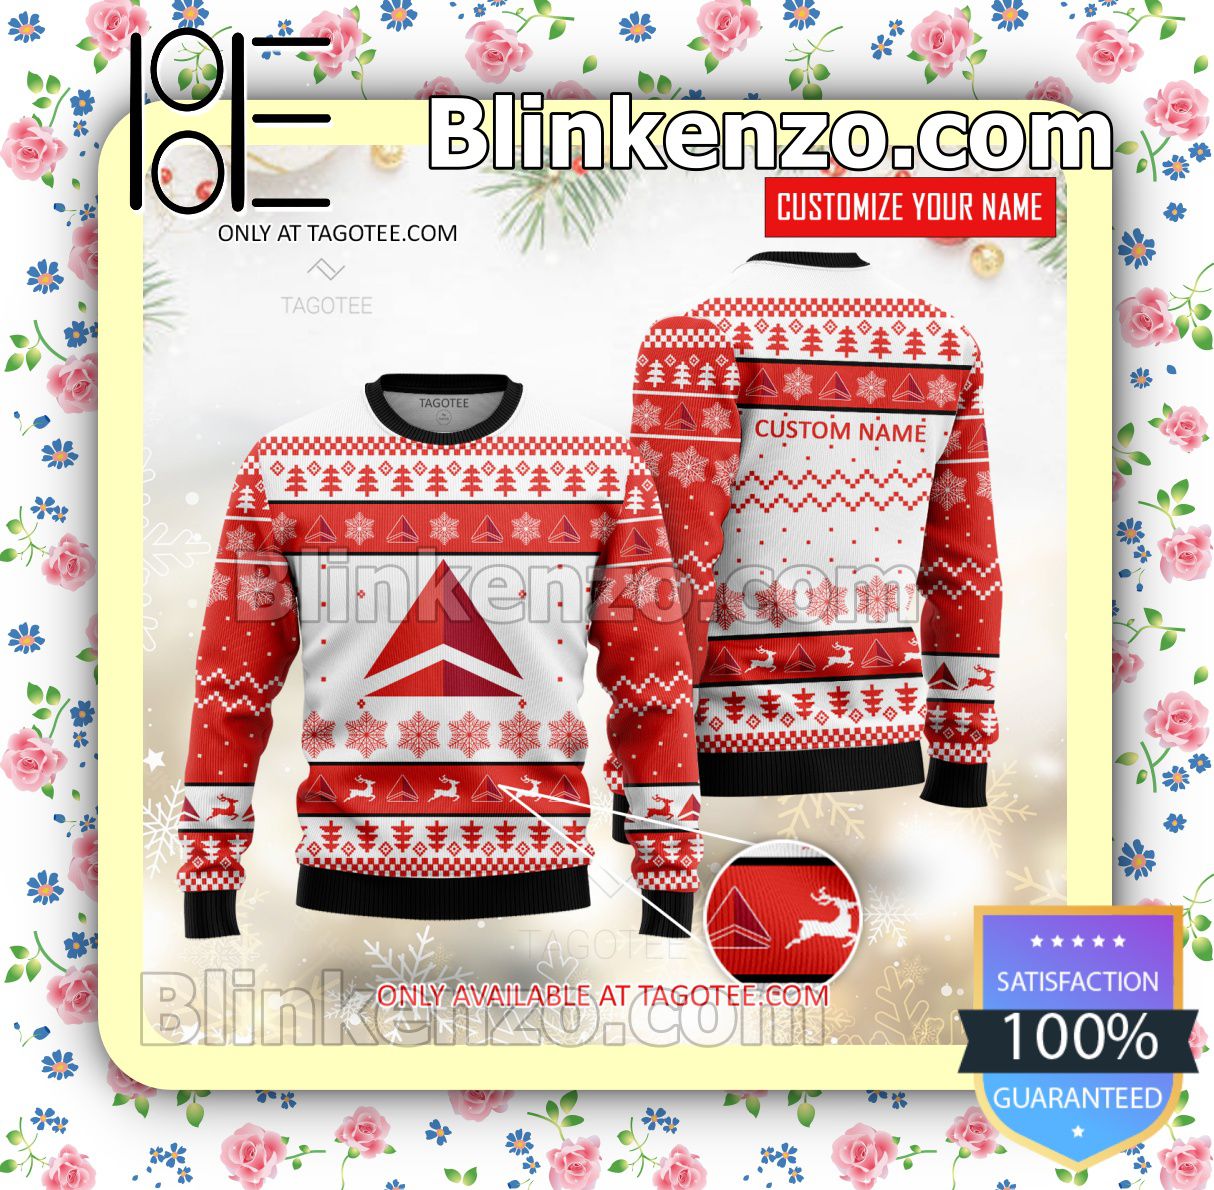 Delta Air Lines Brand Print Christmas Sweater